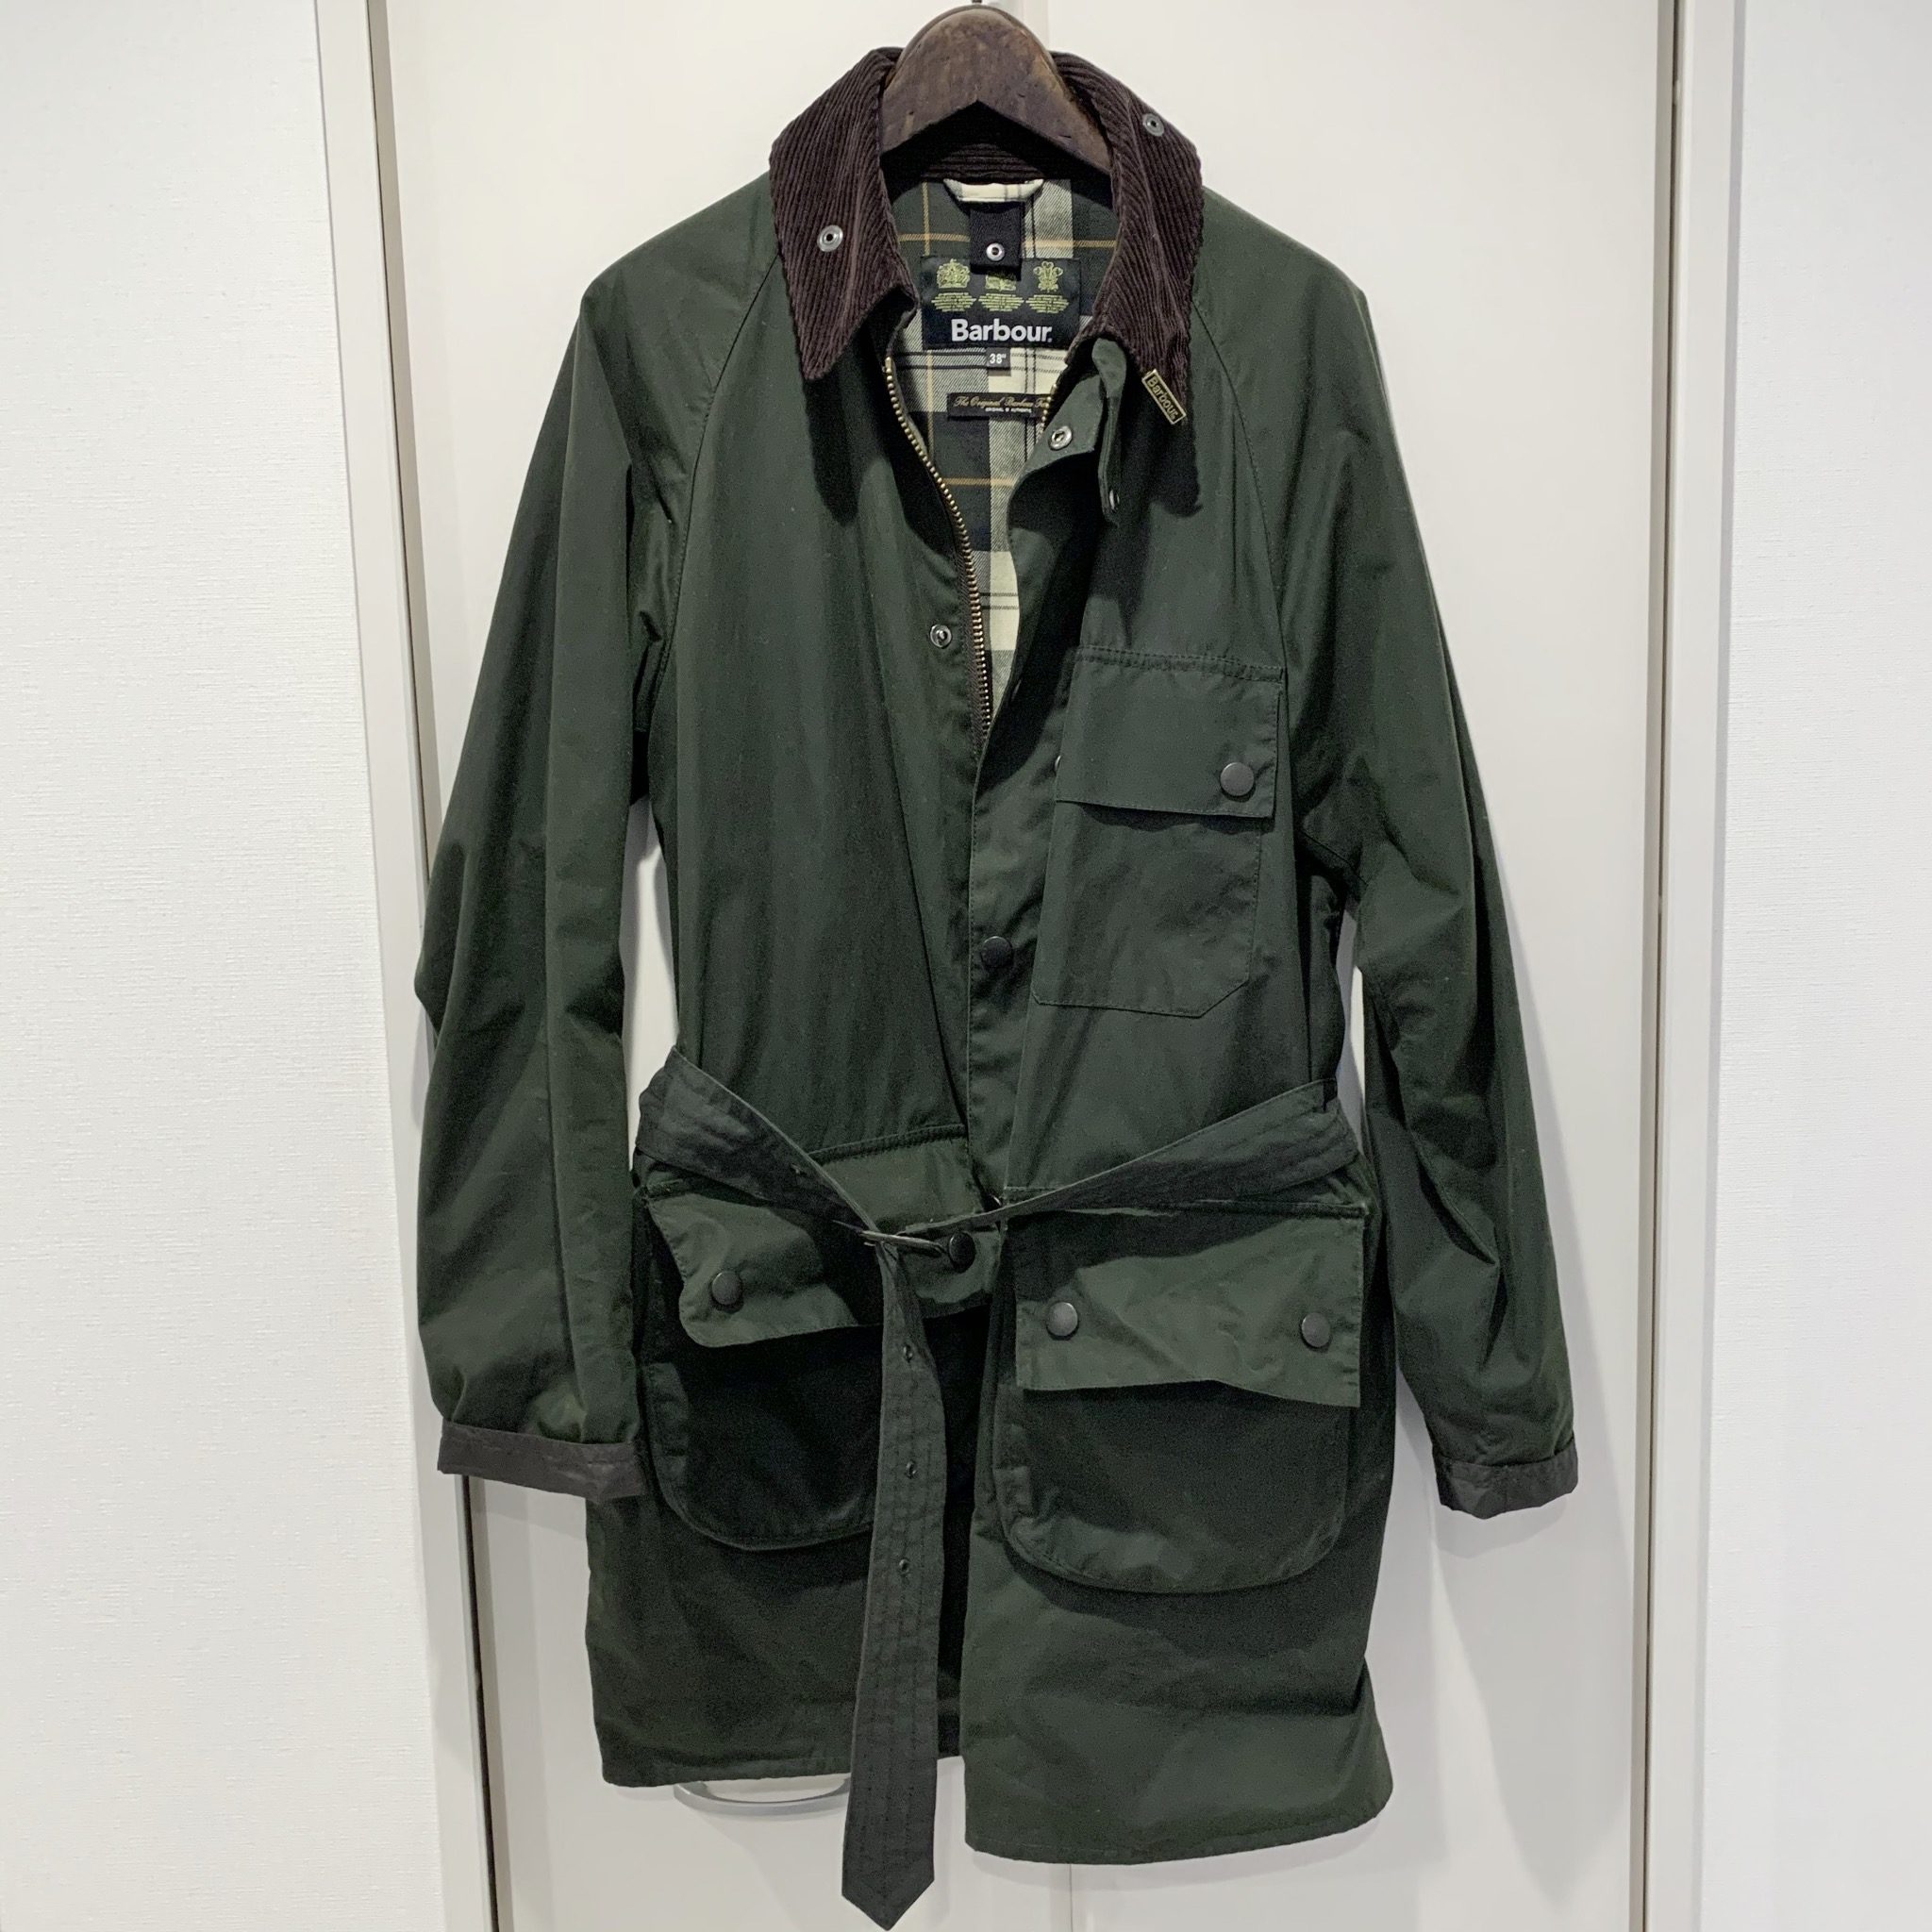 BarbourBarbour バブアー Solwayzipper ソルウェイジッパー 40程度